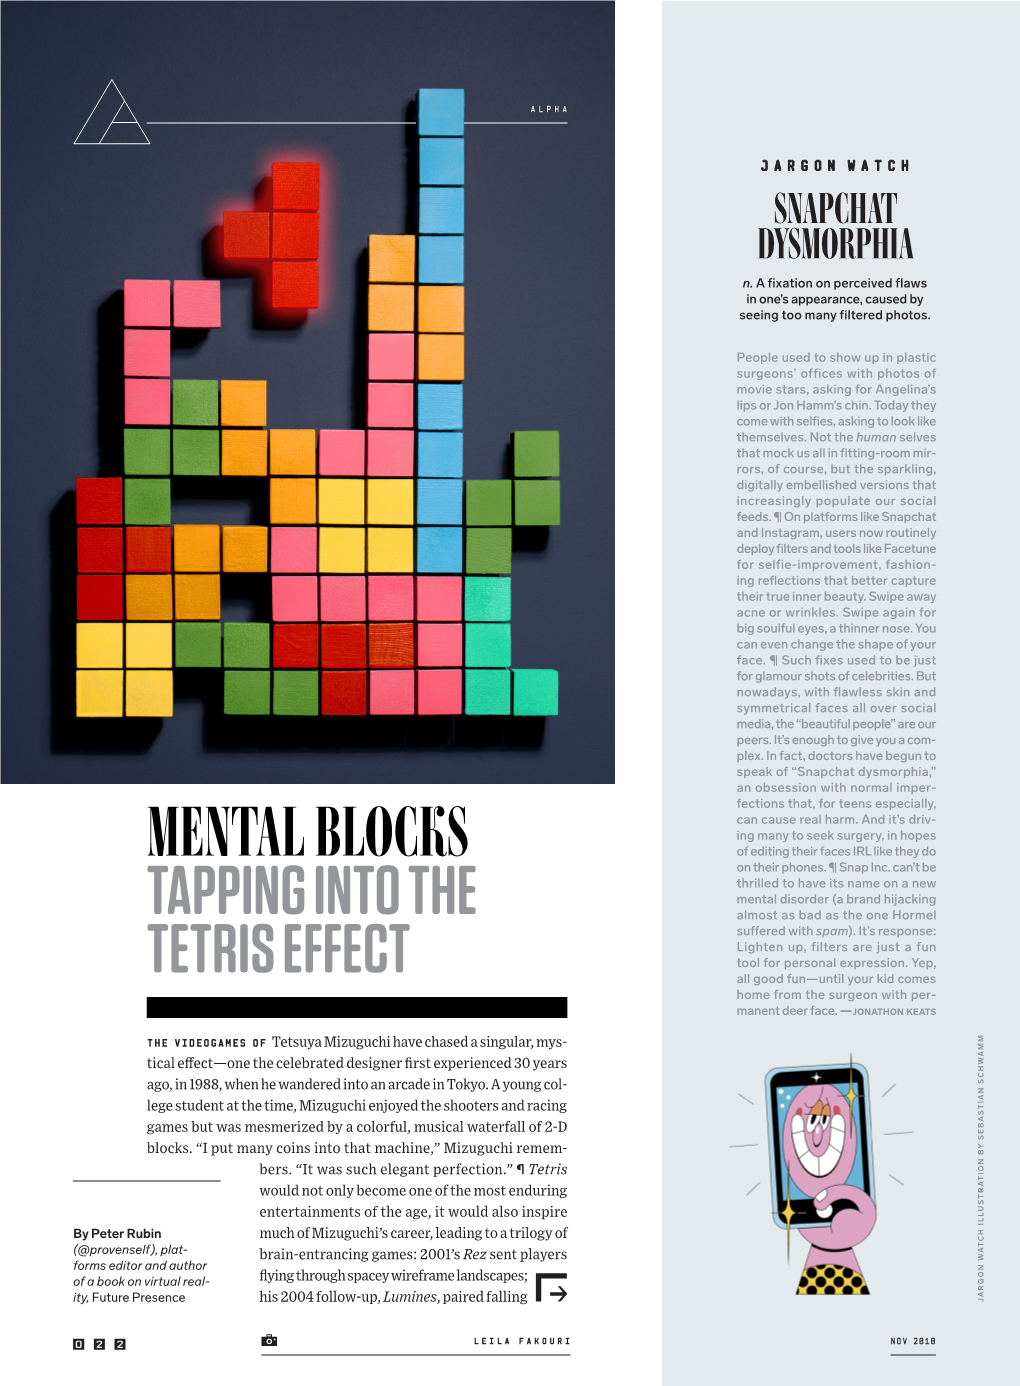 Mental Blocks Tapping Into the Tetris Effect